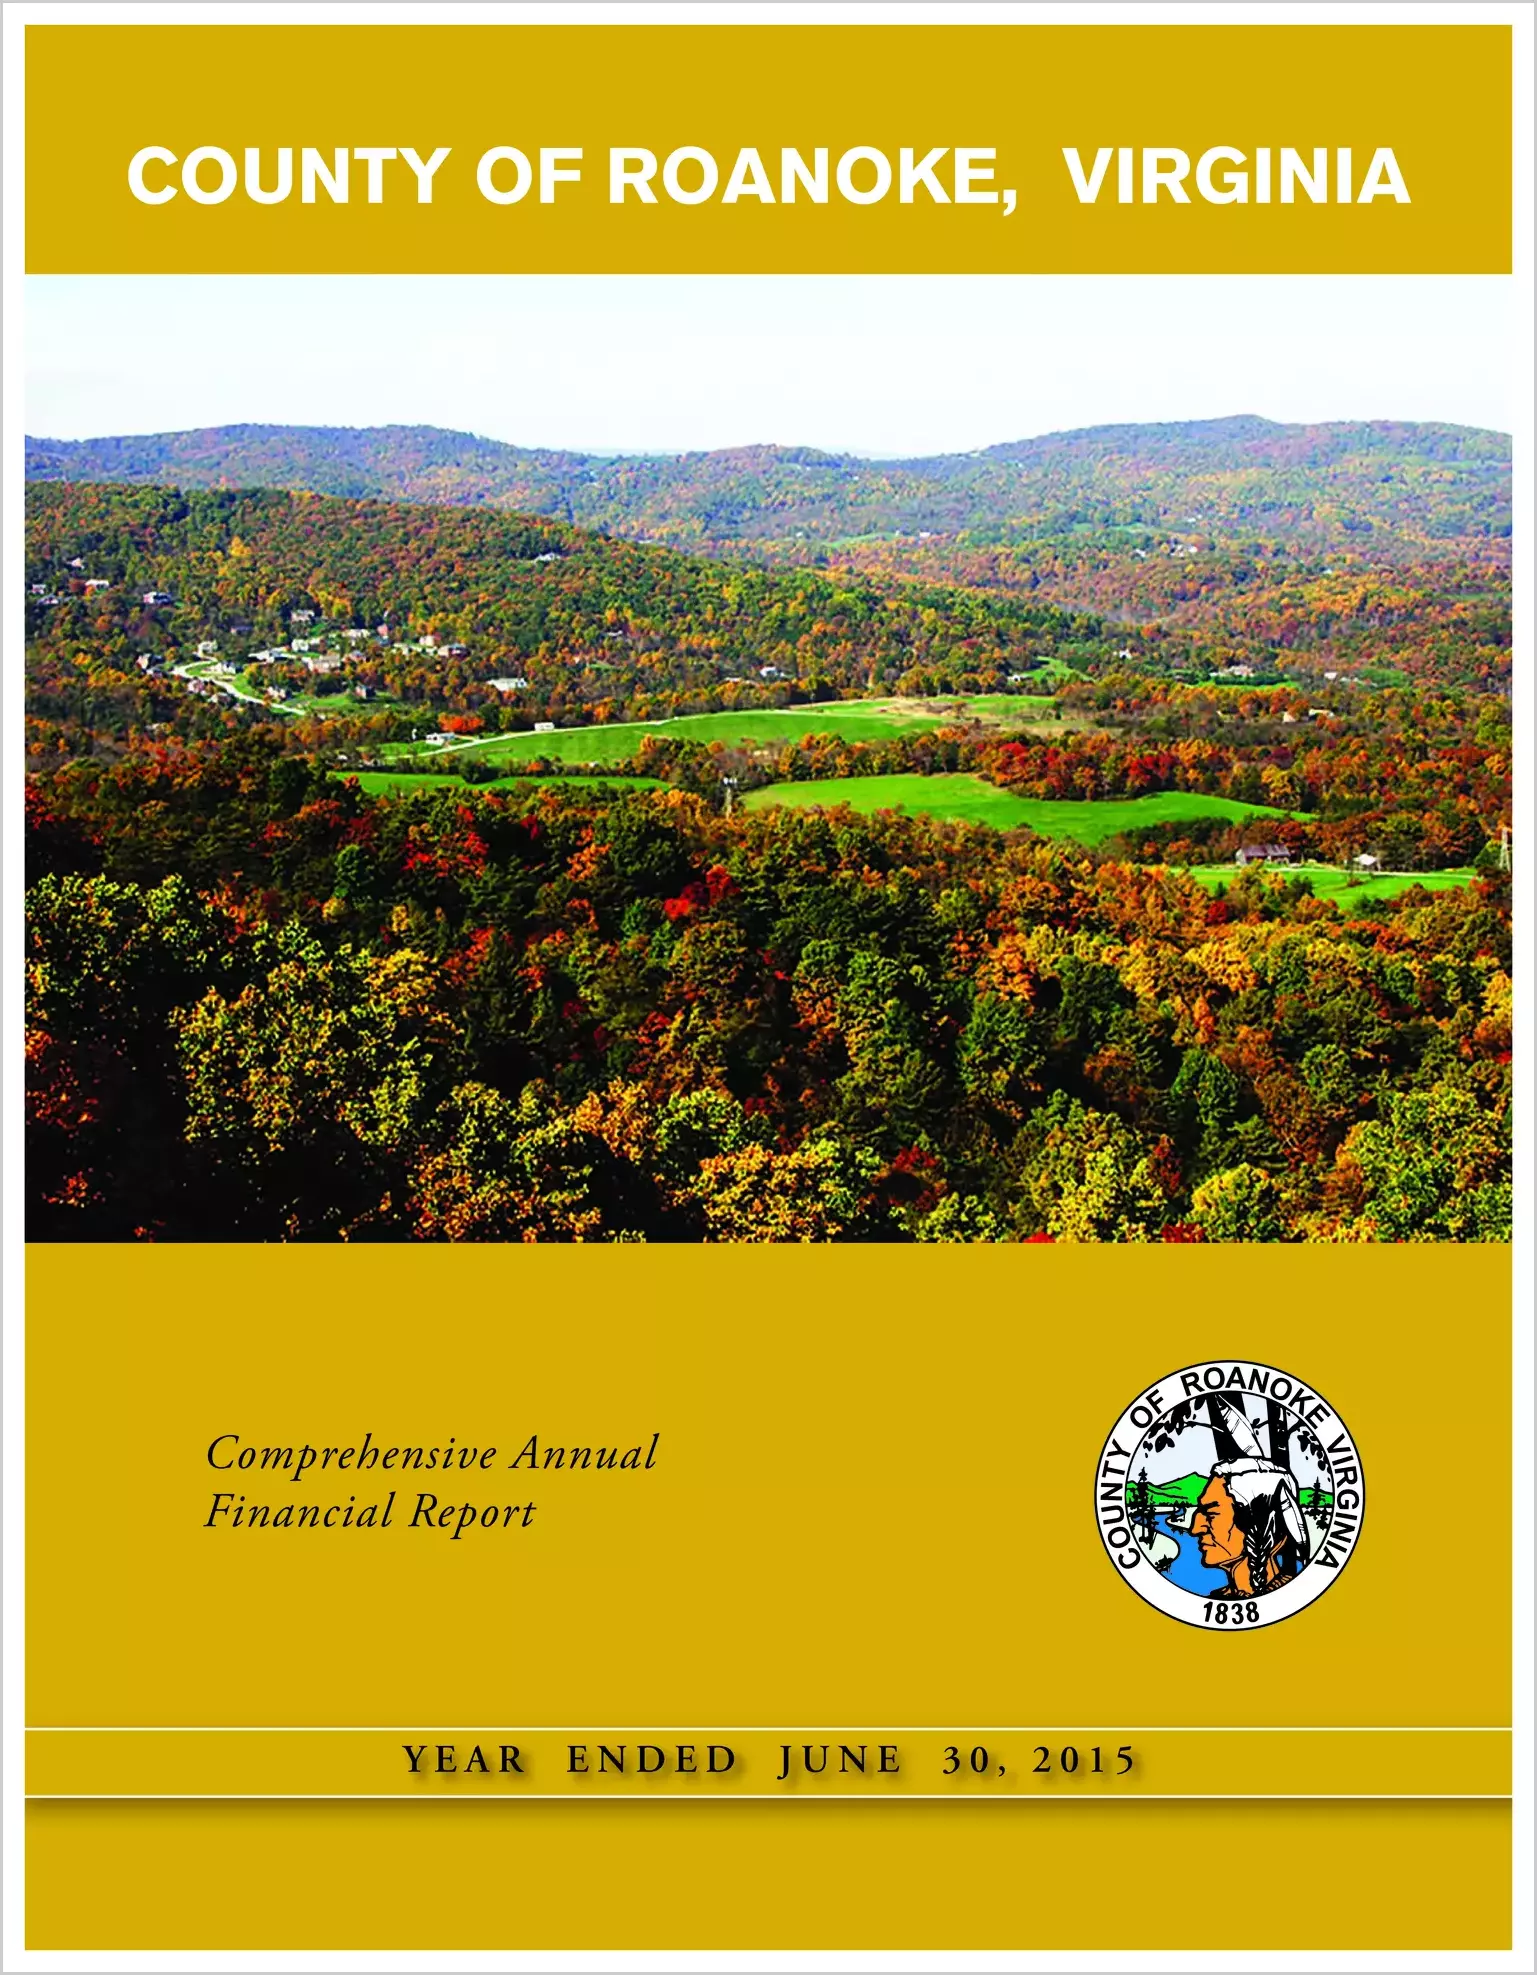 2015 Annual Financial Report for County of Roanoke